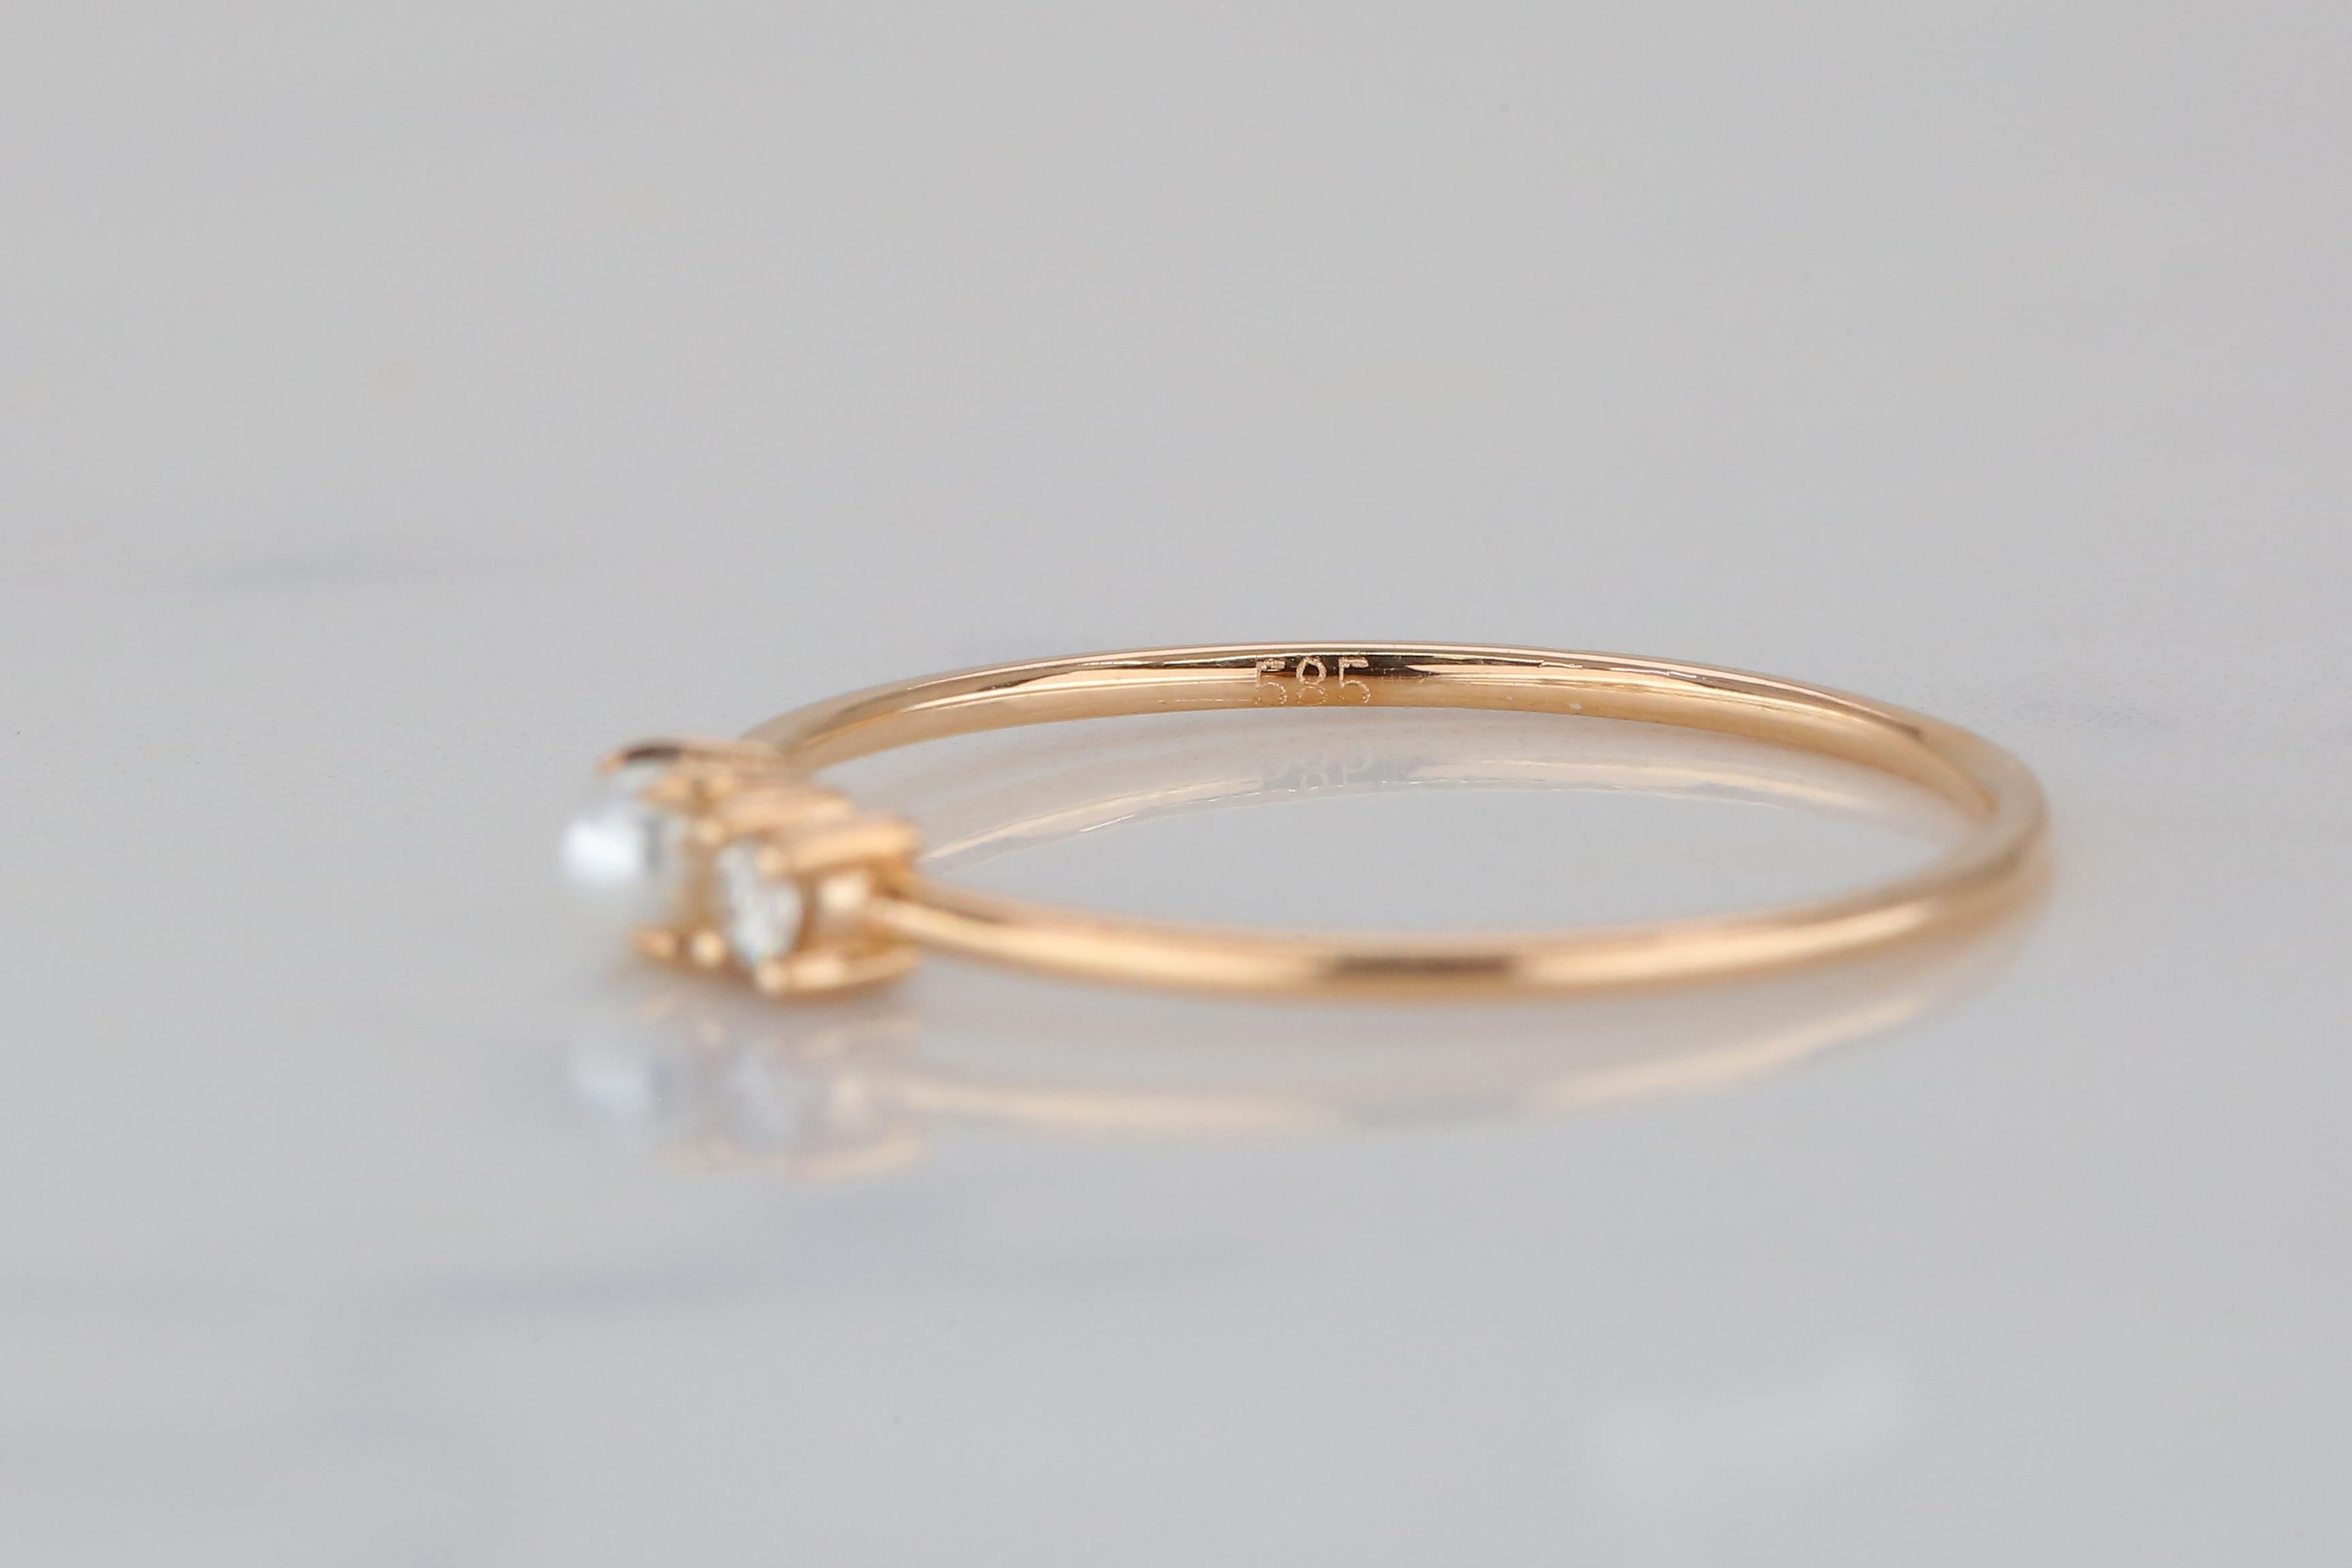 For Sale:  One Pearl and Diamond Ring, 14k Gold Pearl Ring, Minimalist Style Ring 4